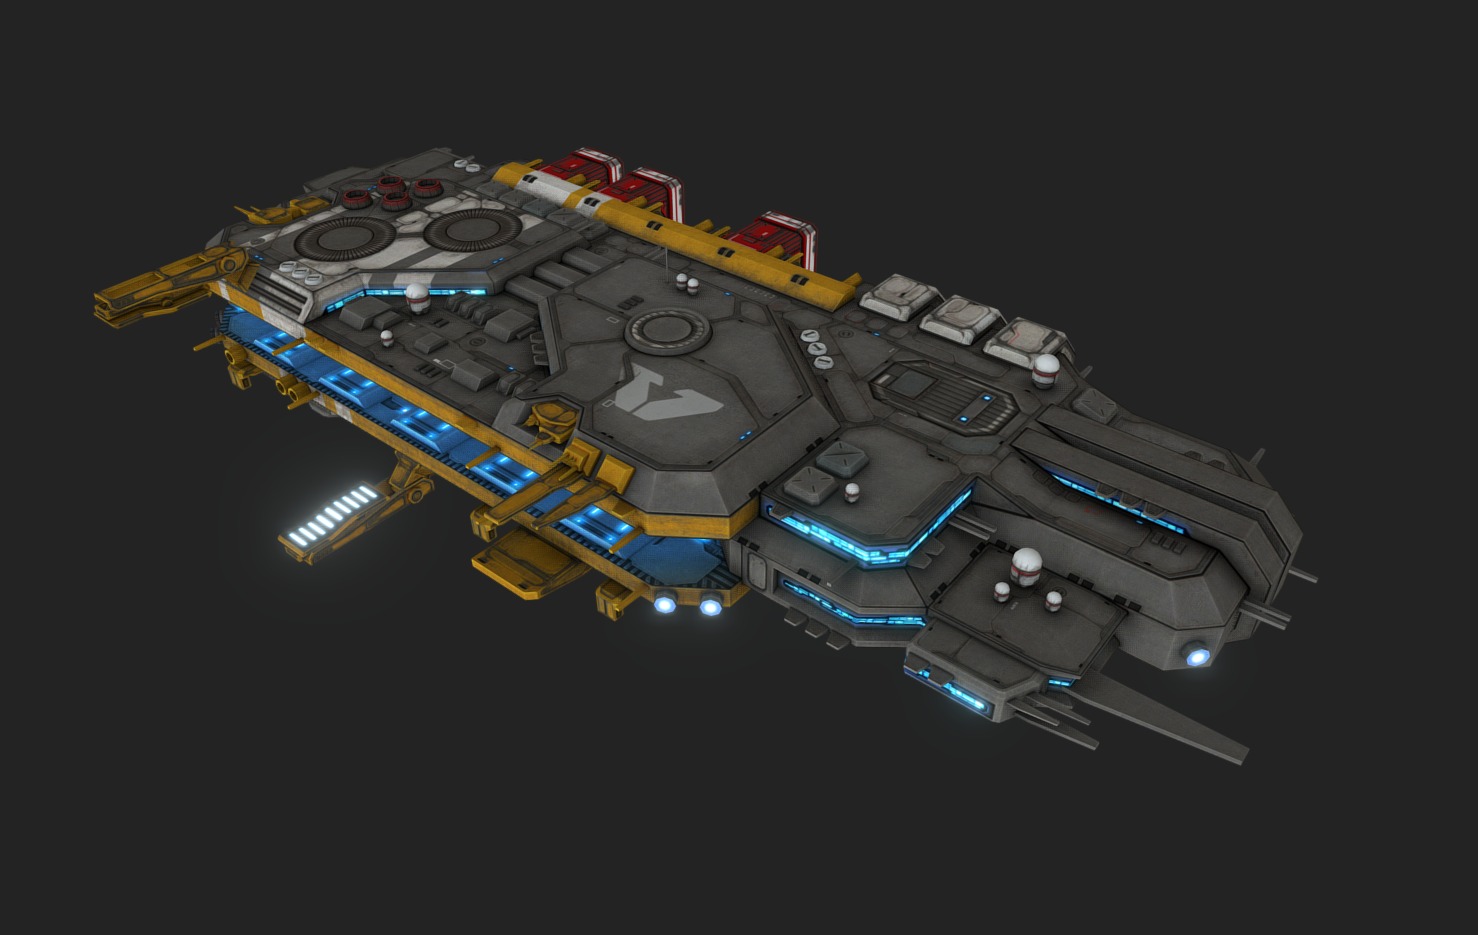 Remodeling and texturing by Oni.
Based on the original concept by relic.
www.homeworld2complex.com 
http:http://complex.mastertopforum.com https://www.patreon.com/beghins - vgr_servicedepot - 3D model by Oni (@Oni_cmx) 3d model